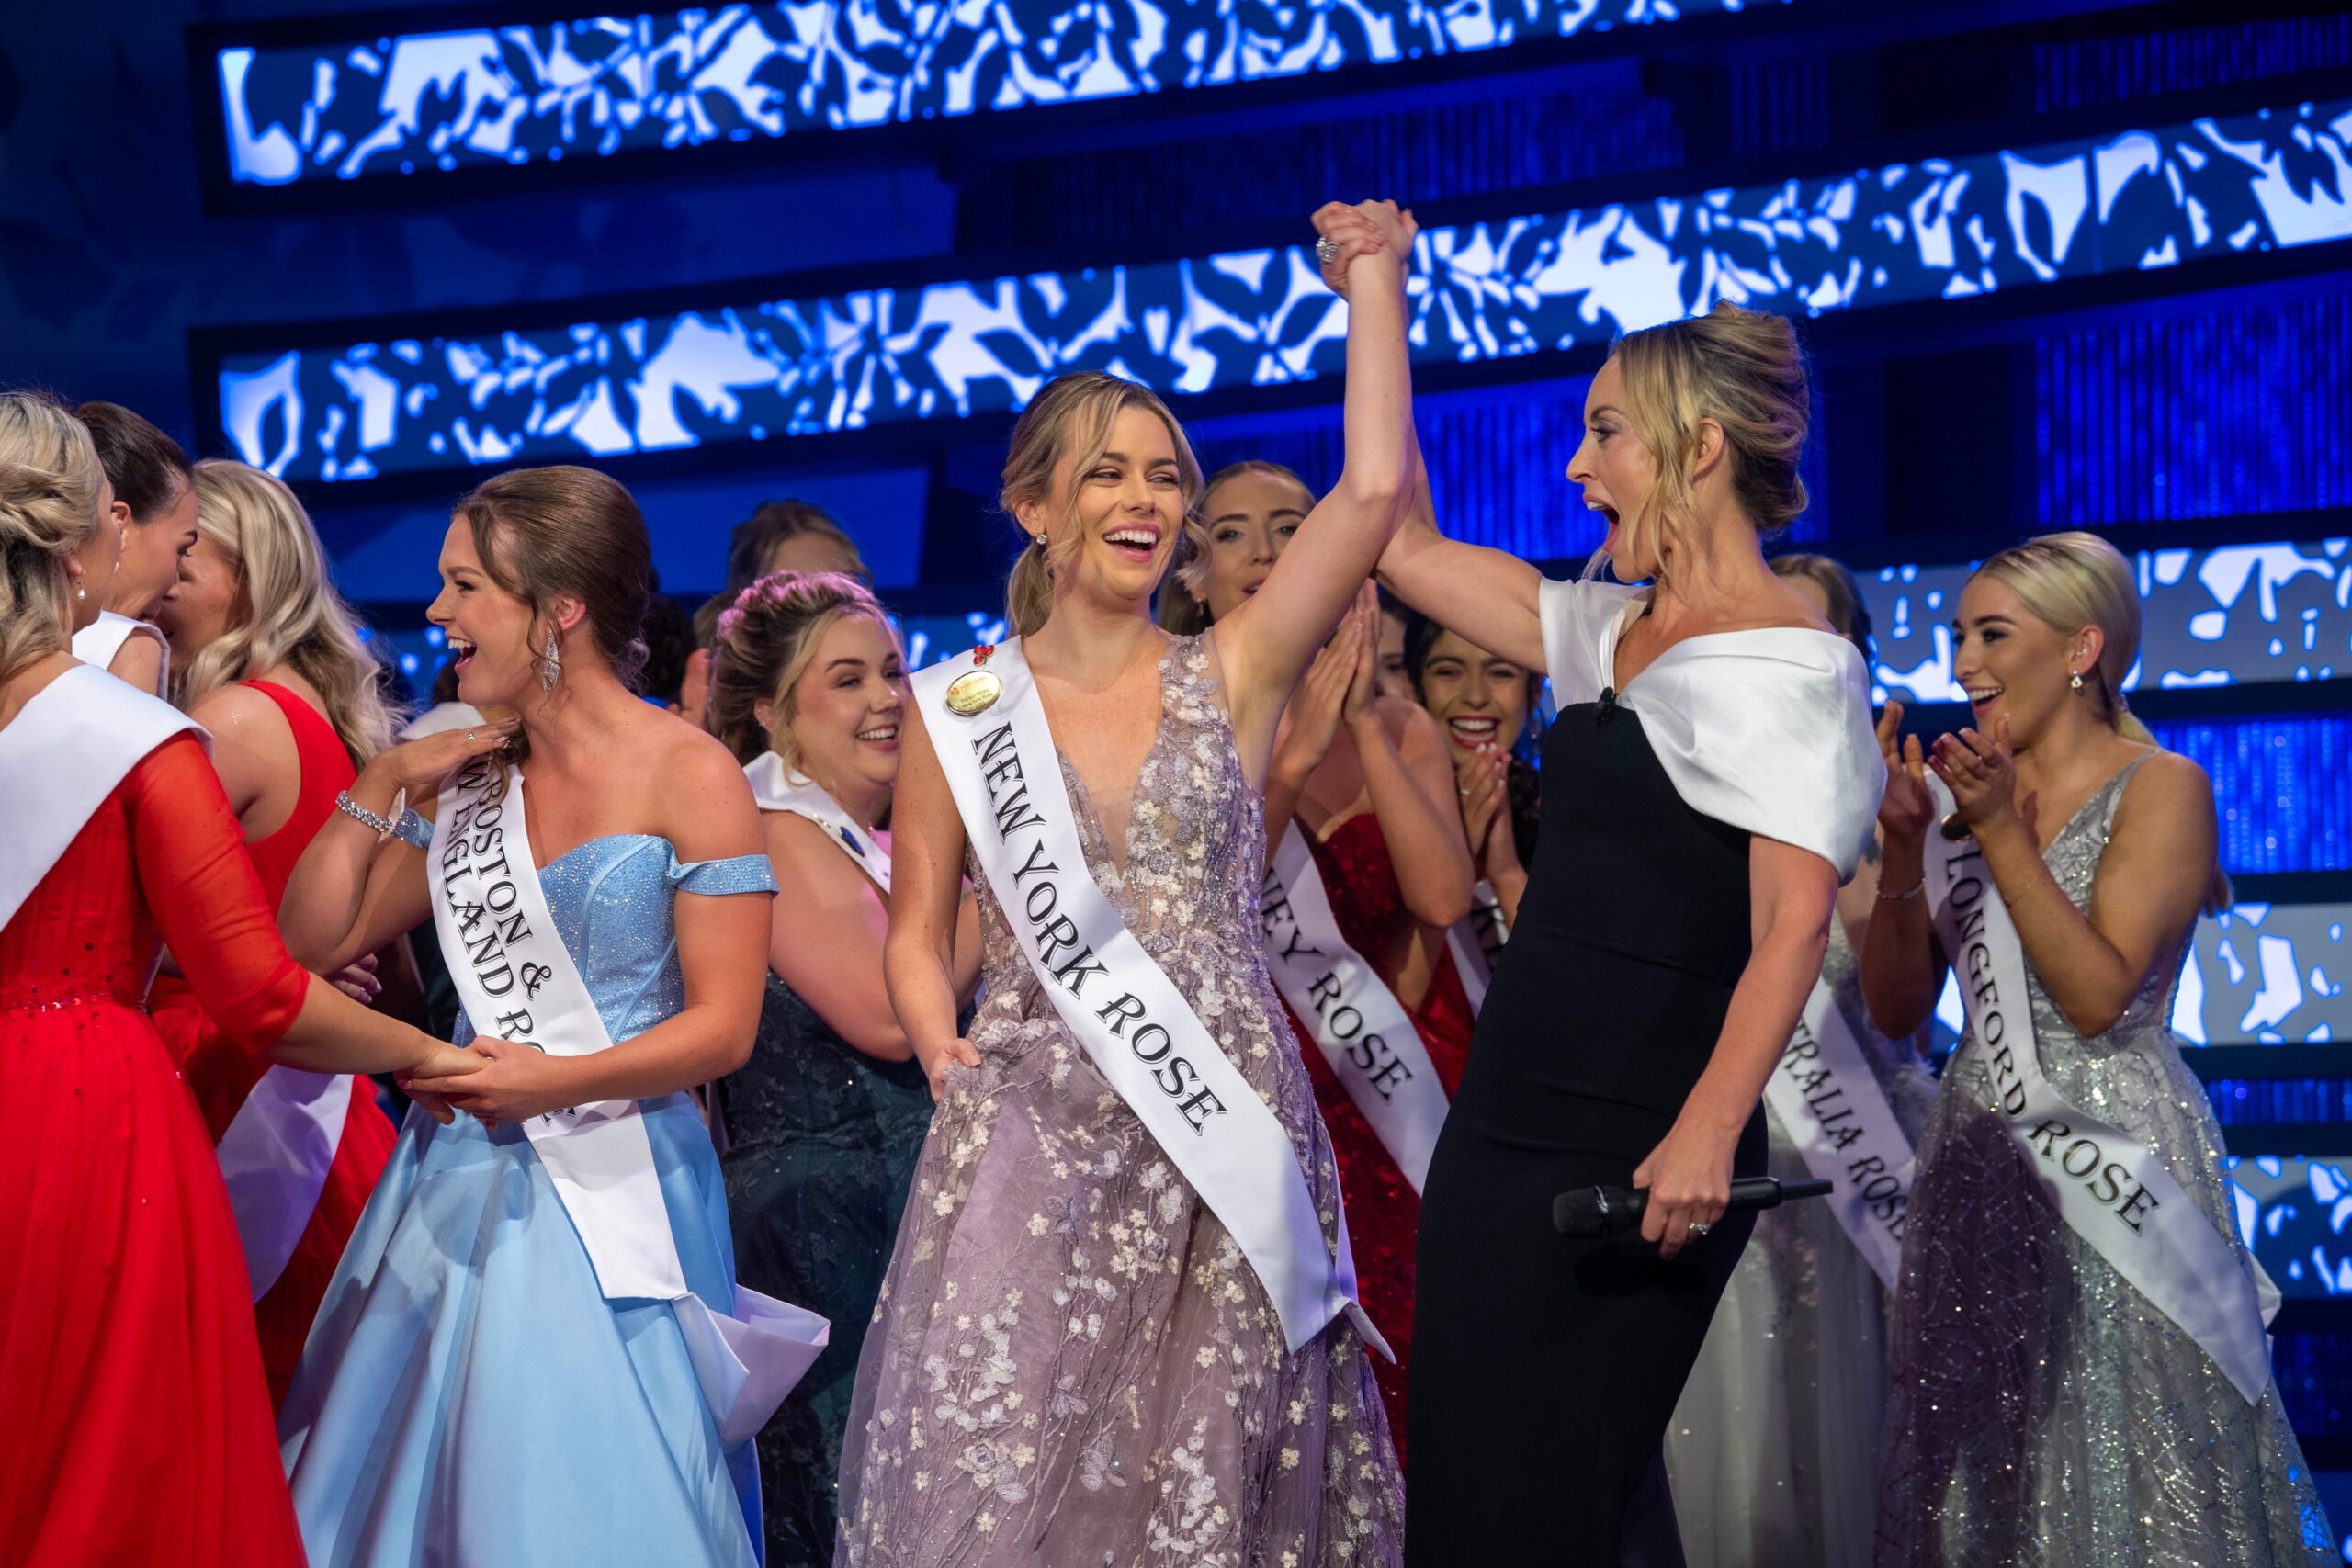 New York Rose Róisín Wiley crowned the Rose of Tralee 2023 as her family celebrates in Limerick